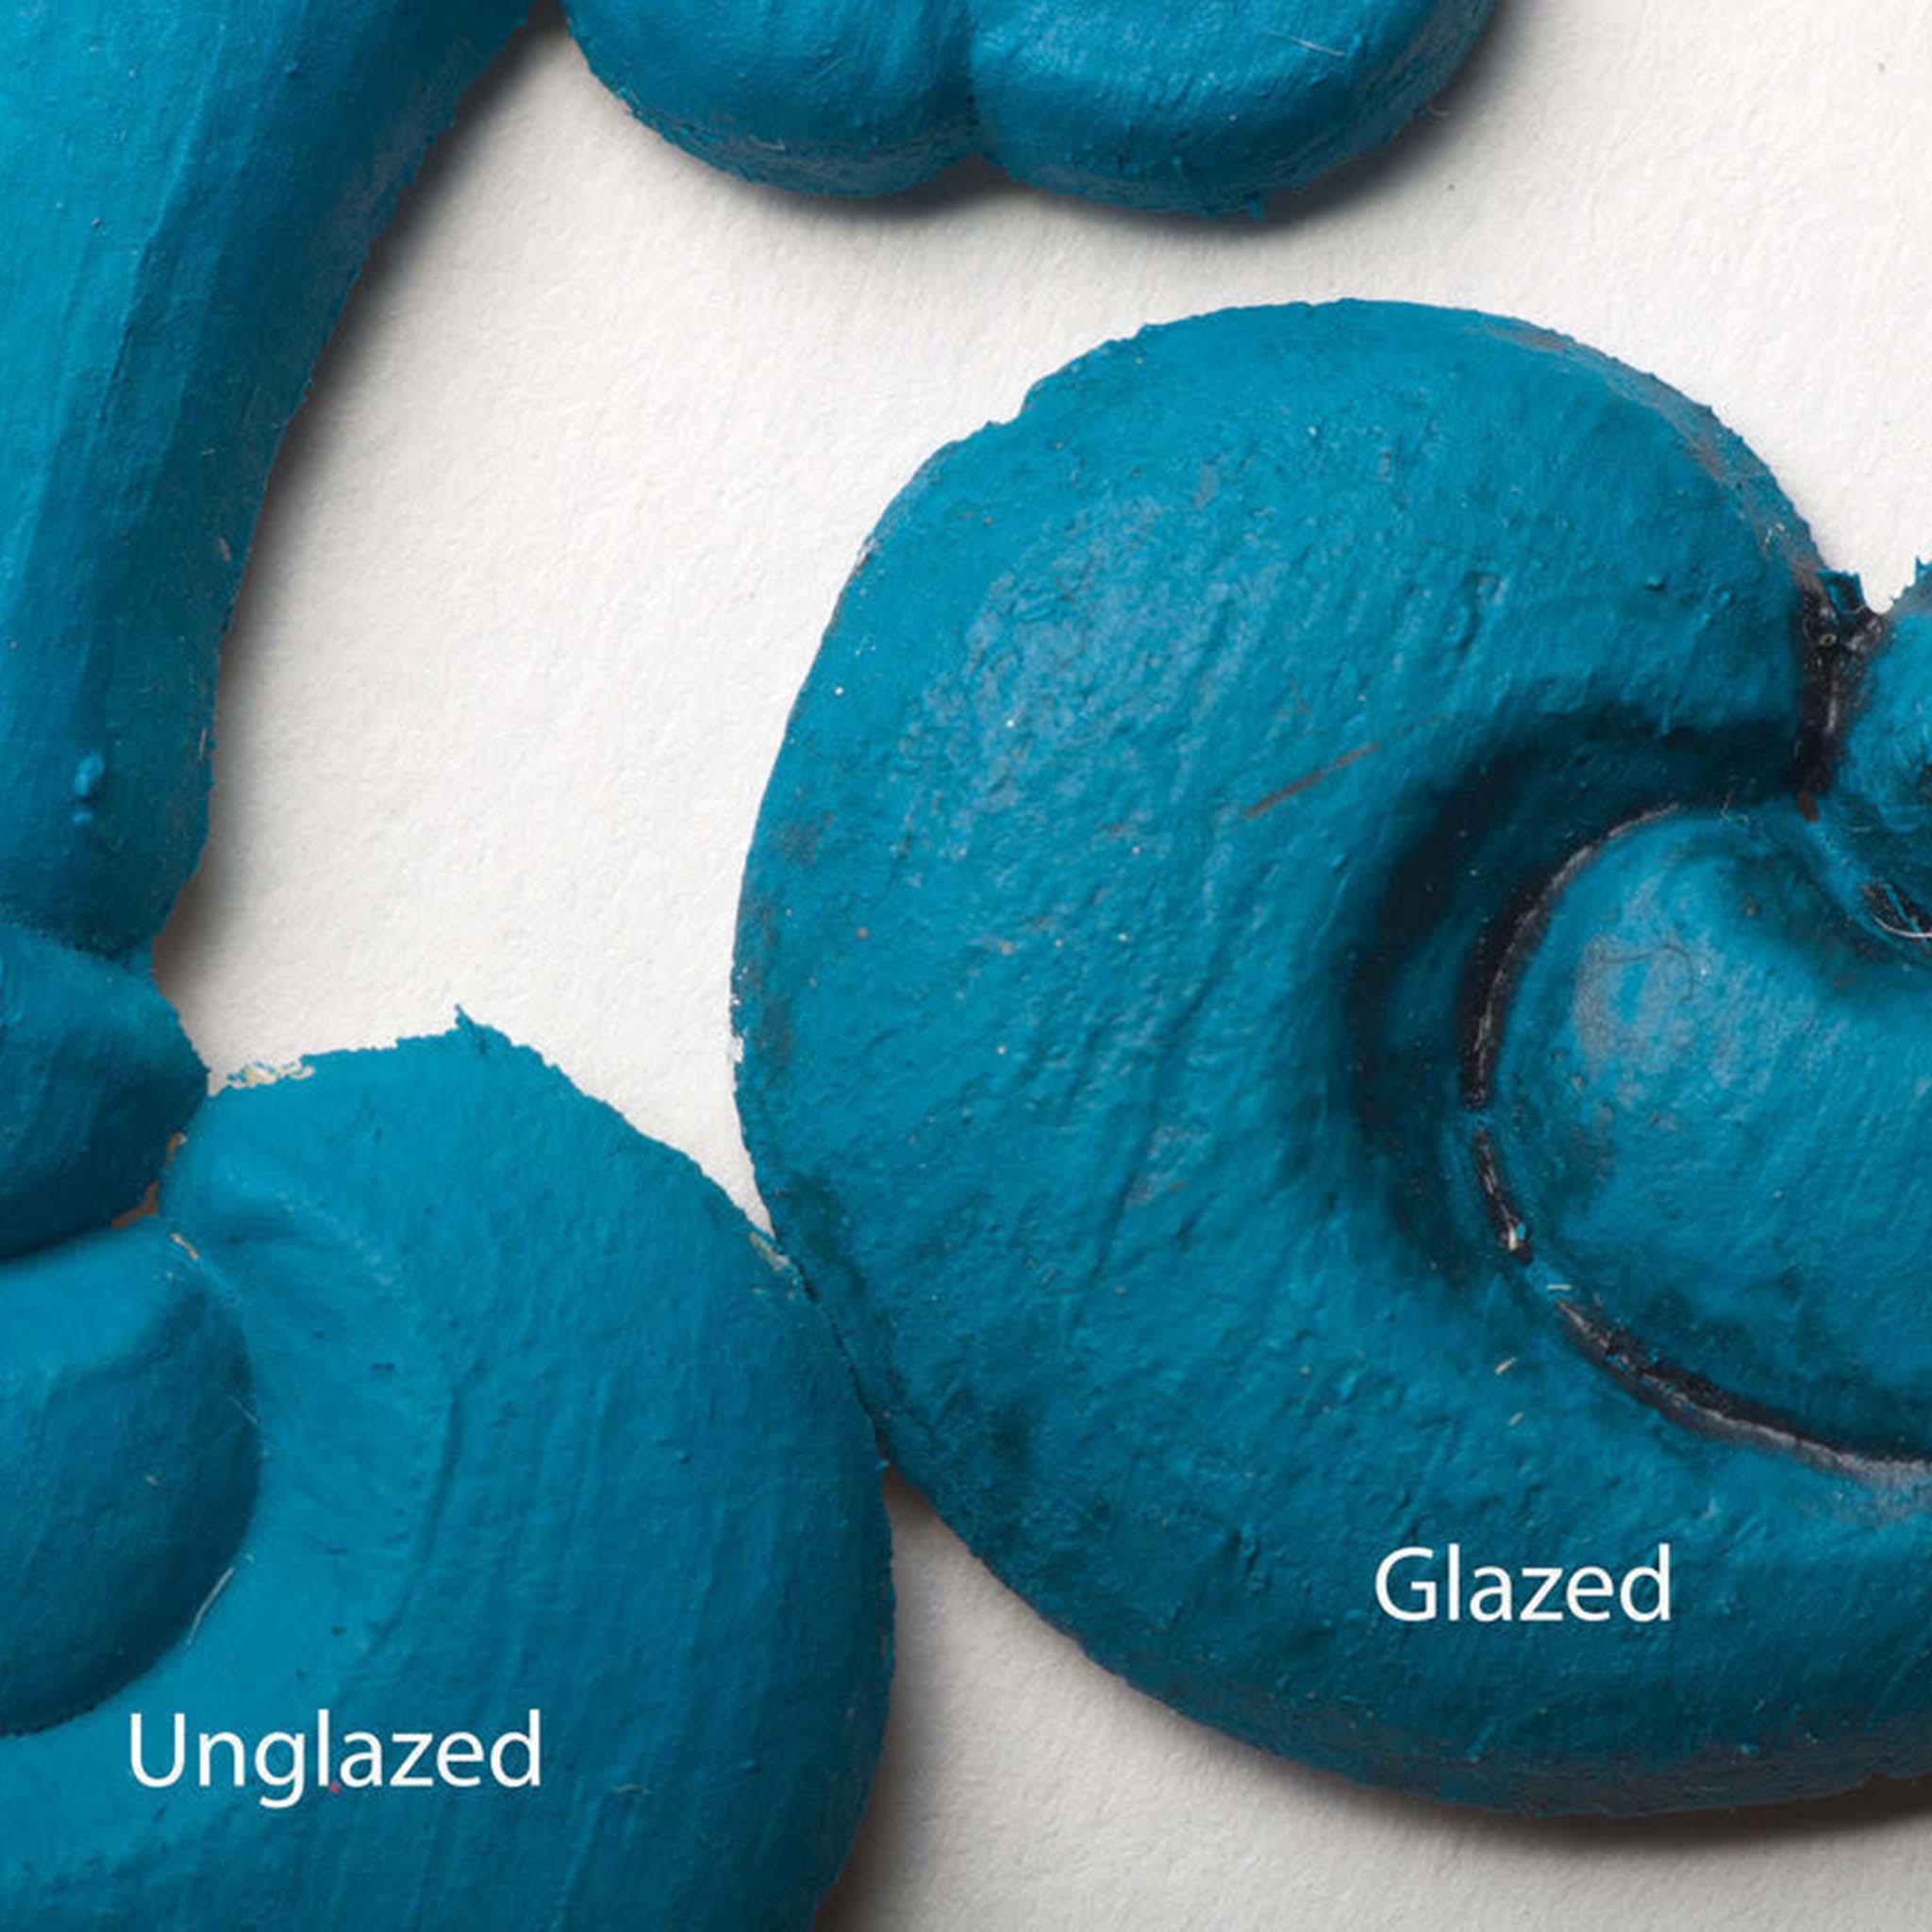 Close-up view of a teal blue colored silicone mould casting that shows the before and after use of Dixie Belle's Black Glaze.